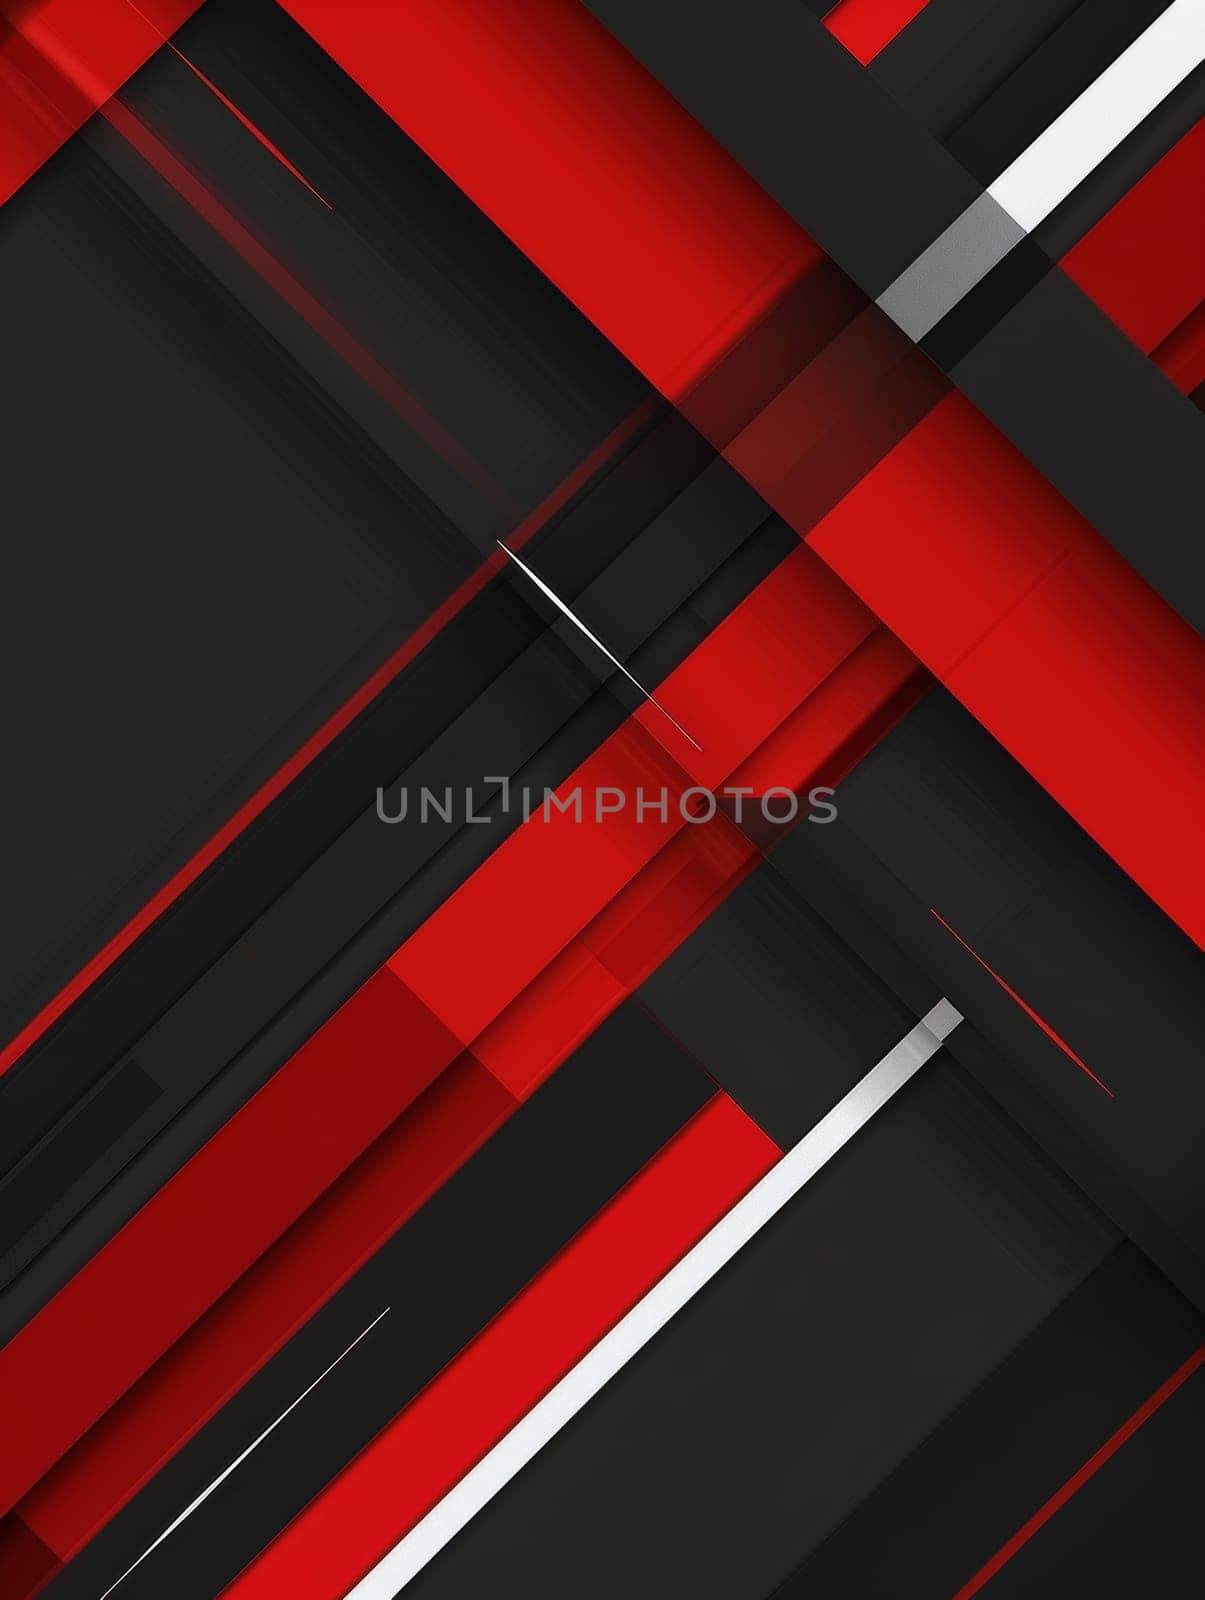 An abstract with layered geometric lines in varying shades of red and white, conveying depth and digital precision. Black white red abstract geometric presentation